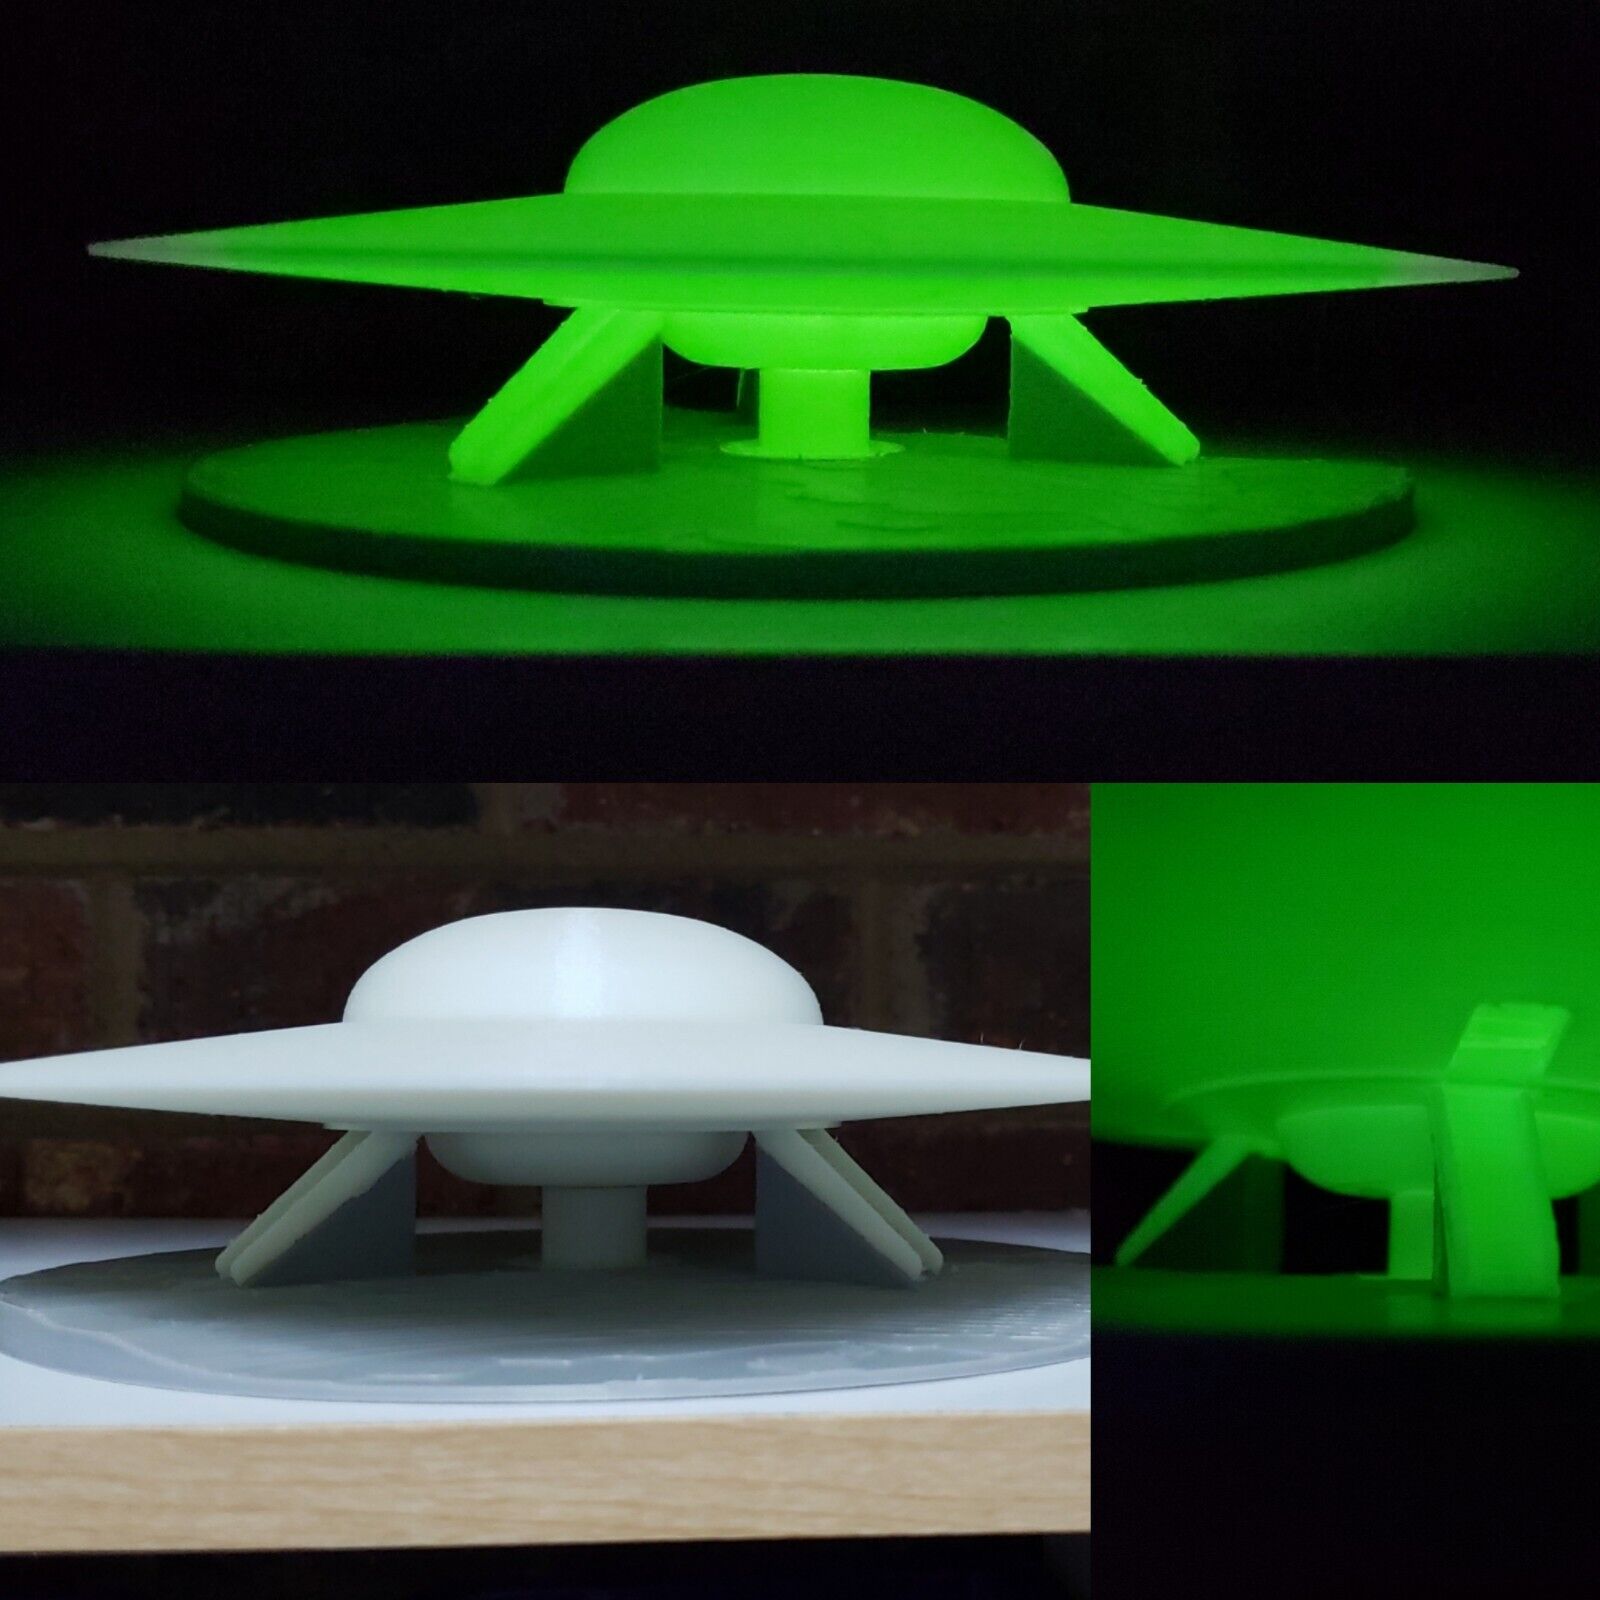 C-57D UFO/Flying Saucer (from Forbidden Planet) -Large Glow-in-the-Dark - Landed